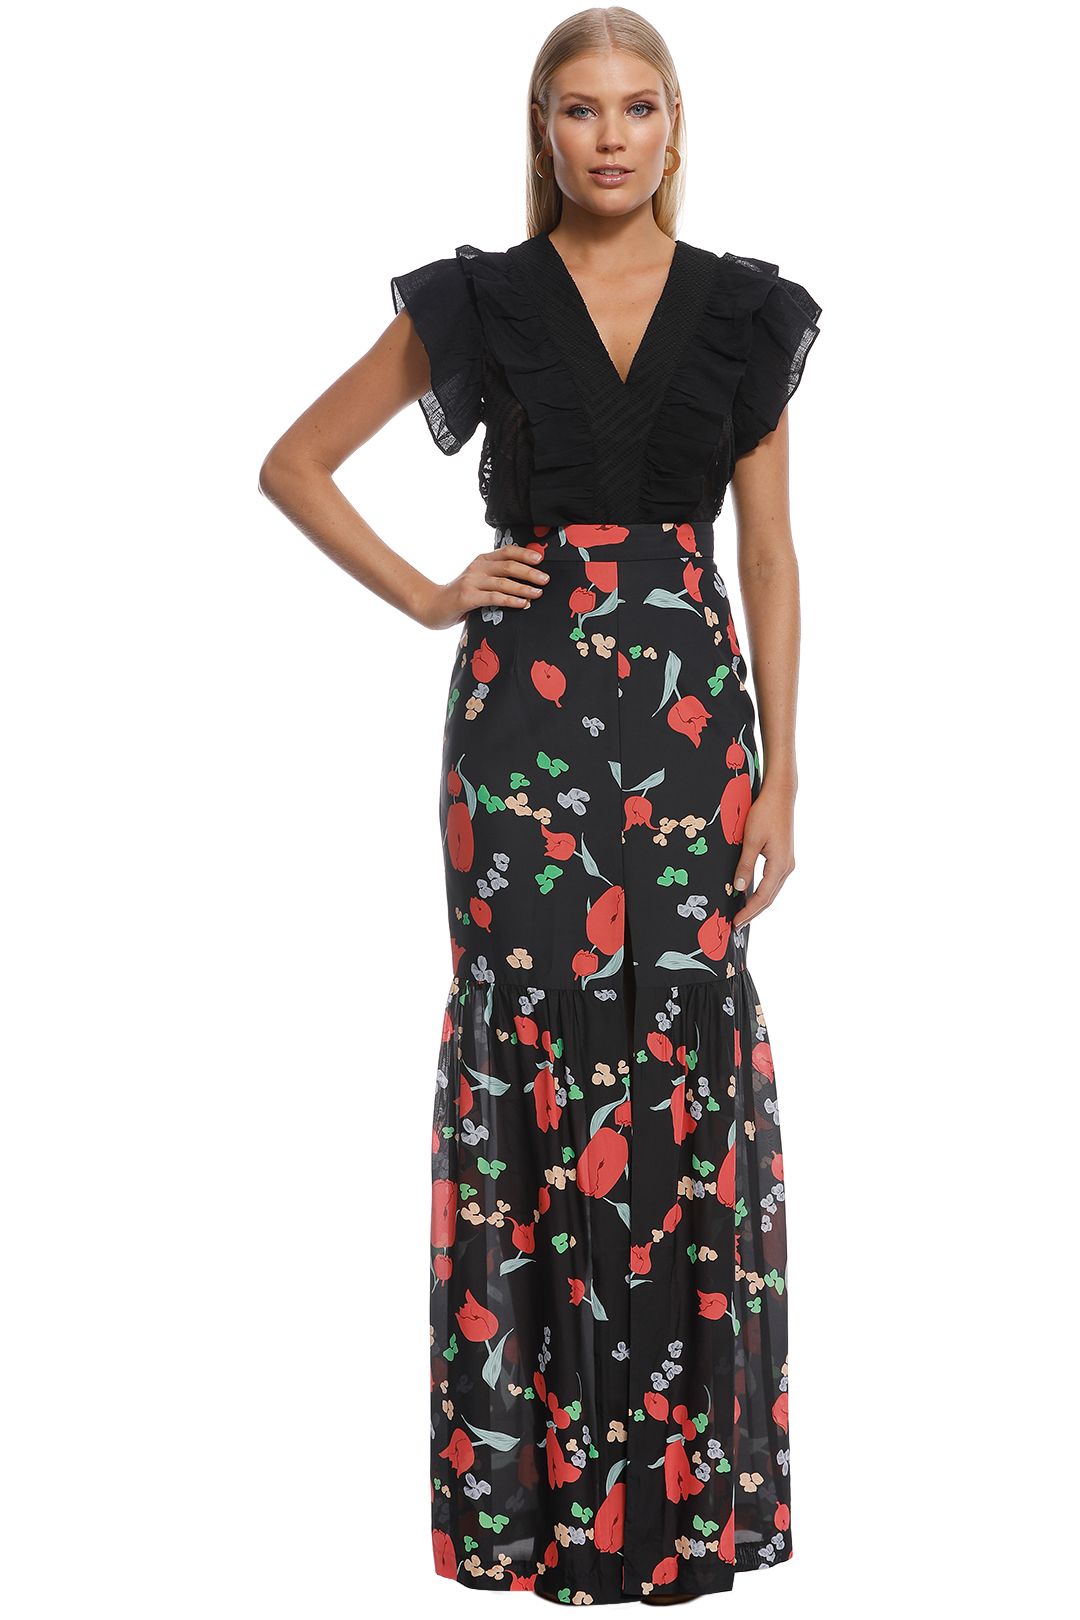 Alice McCall - Move Over Skirt - Black Floral - Front